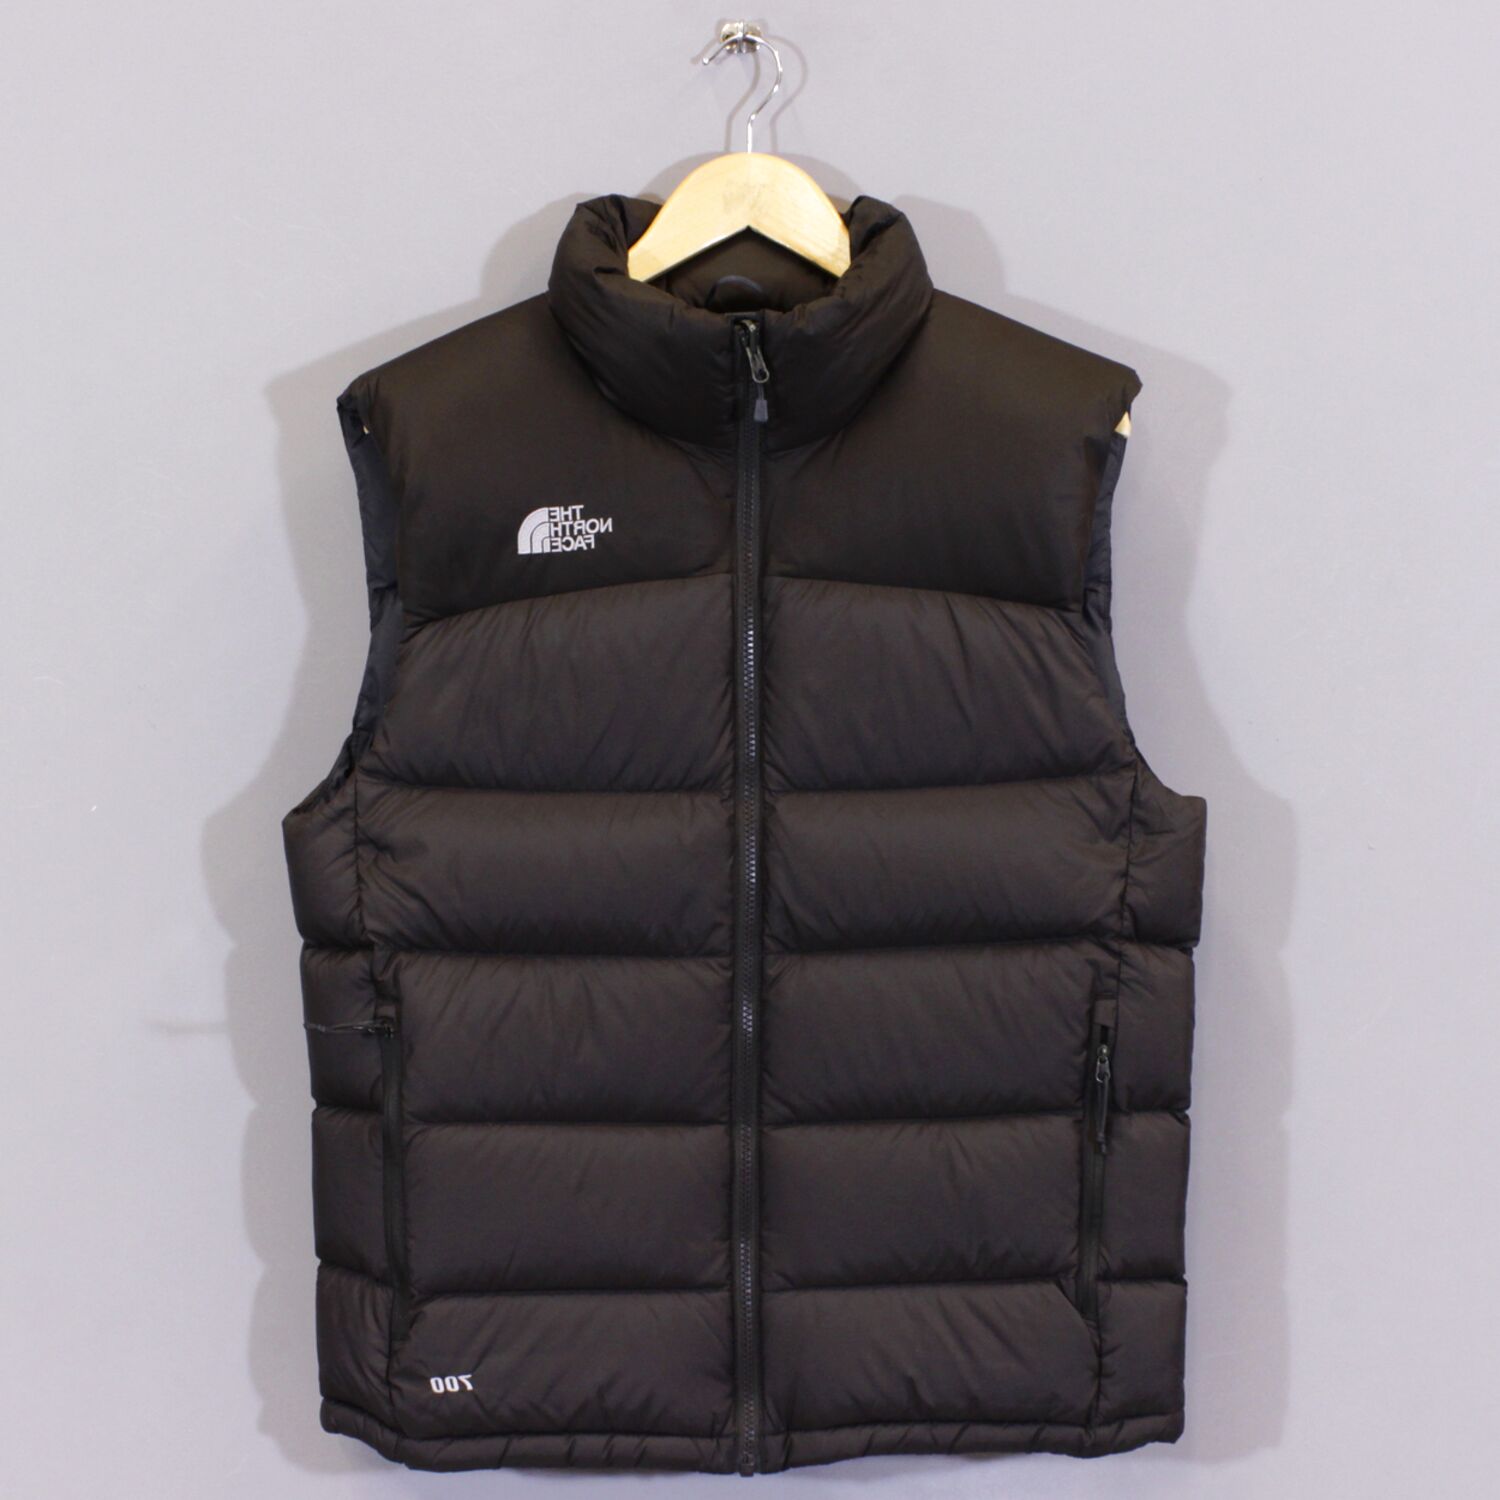 Mens North Face Body Warmer for sale in UK | 66 used Mens North Face ...